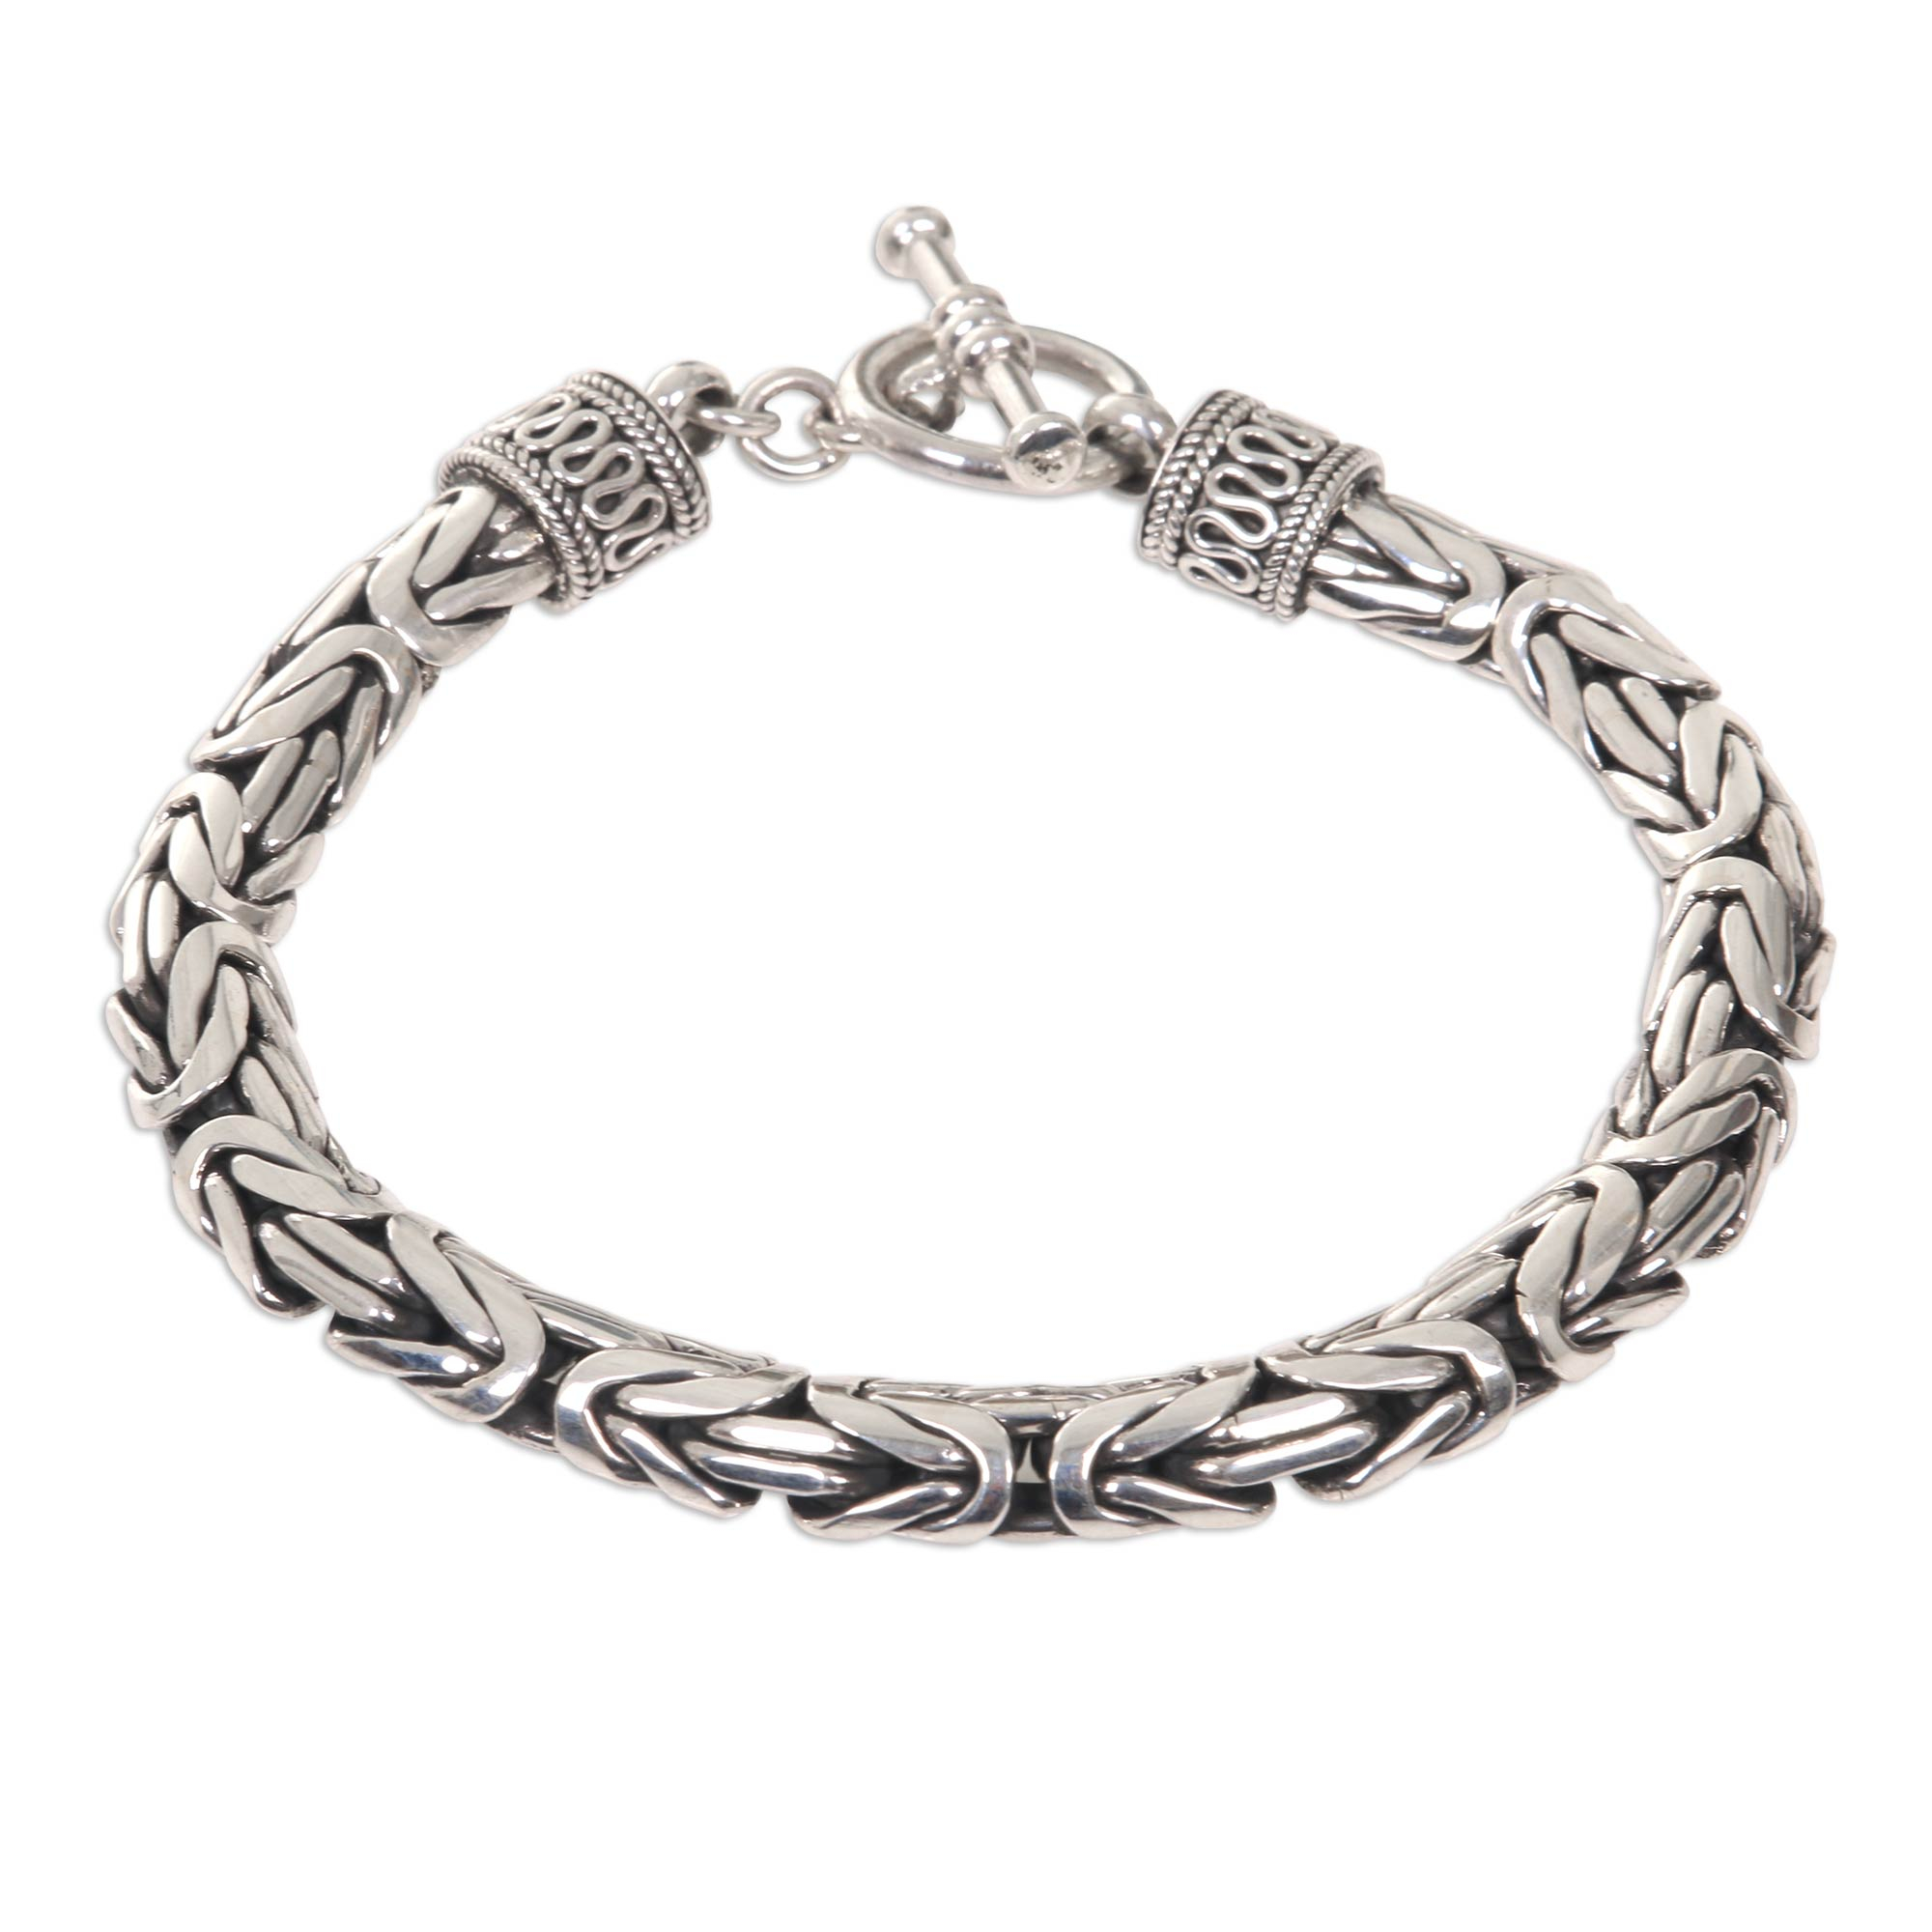 FREE Gift with 35 dollar purchase or more Sterling Silver Fist Bracelet ...